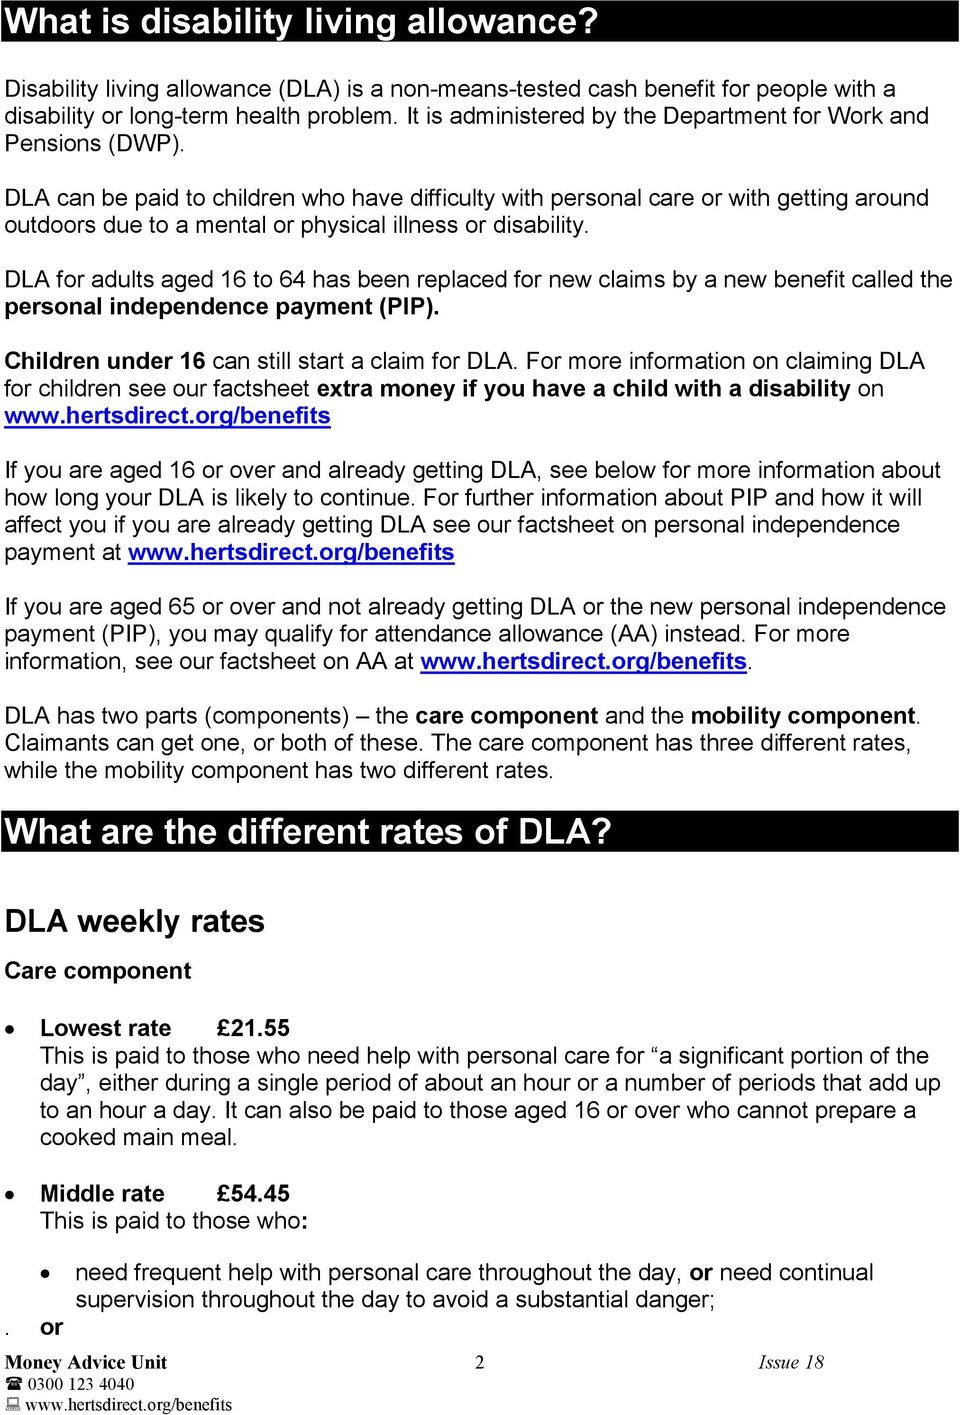 DLA can be paid to children who have difficulty with personal care or with getting around outdoors due to a mental or physical illness or disability.